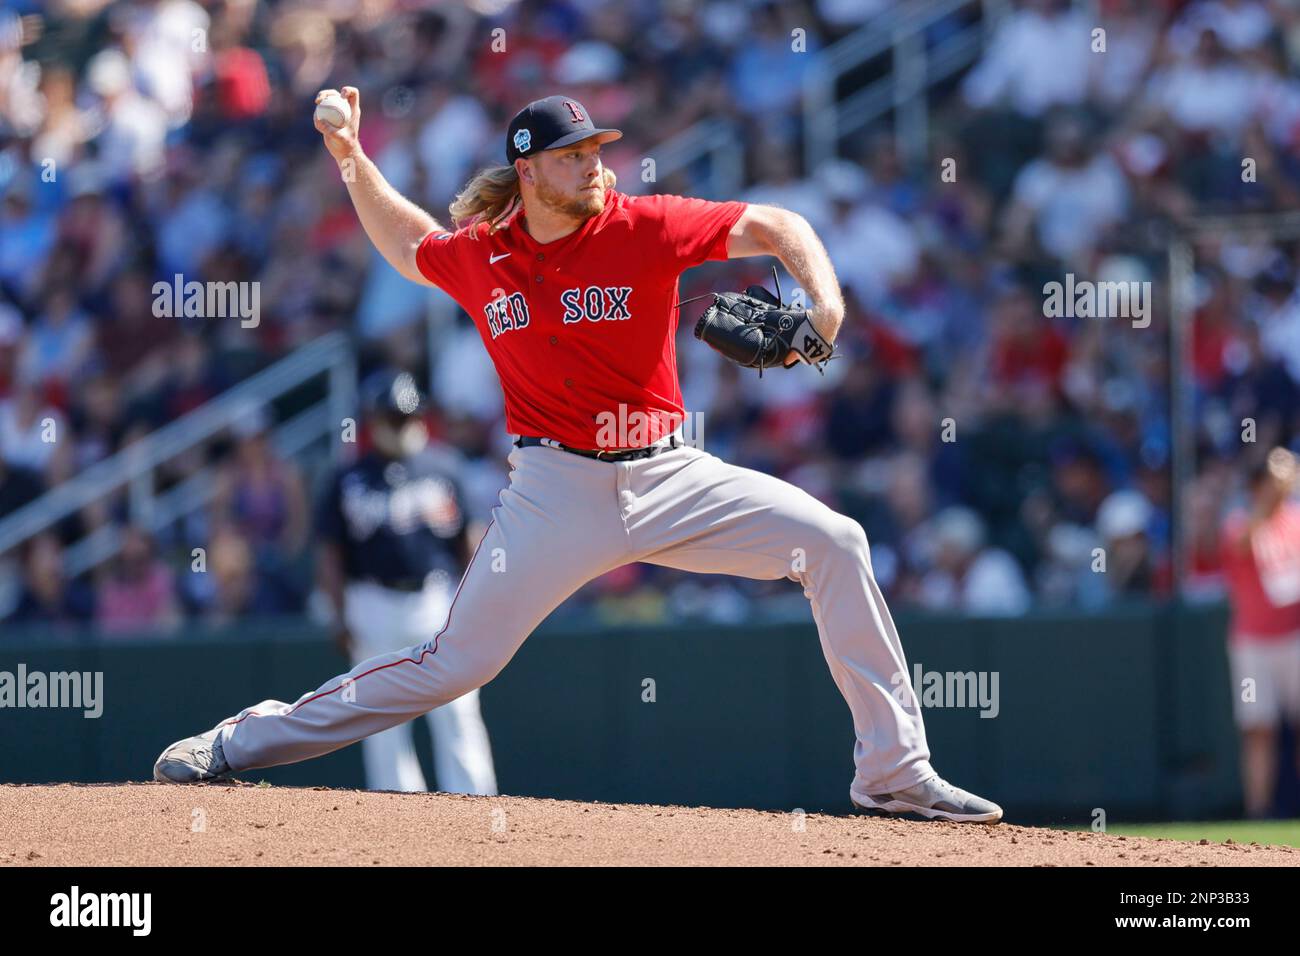 north port fl usa boston red sox pitcher kaleb out 61 delivers a pitch during an mlb spring training game against the atlanta braves at cooltoday p 2NP3B33